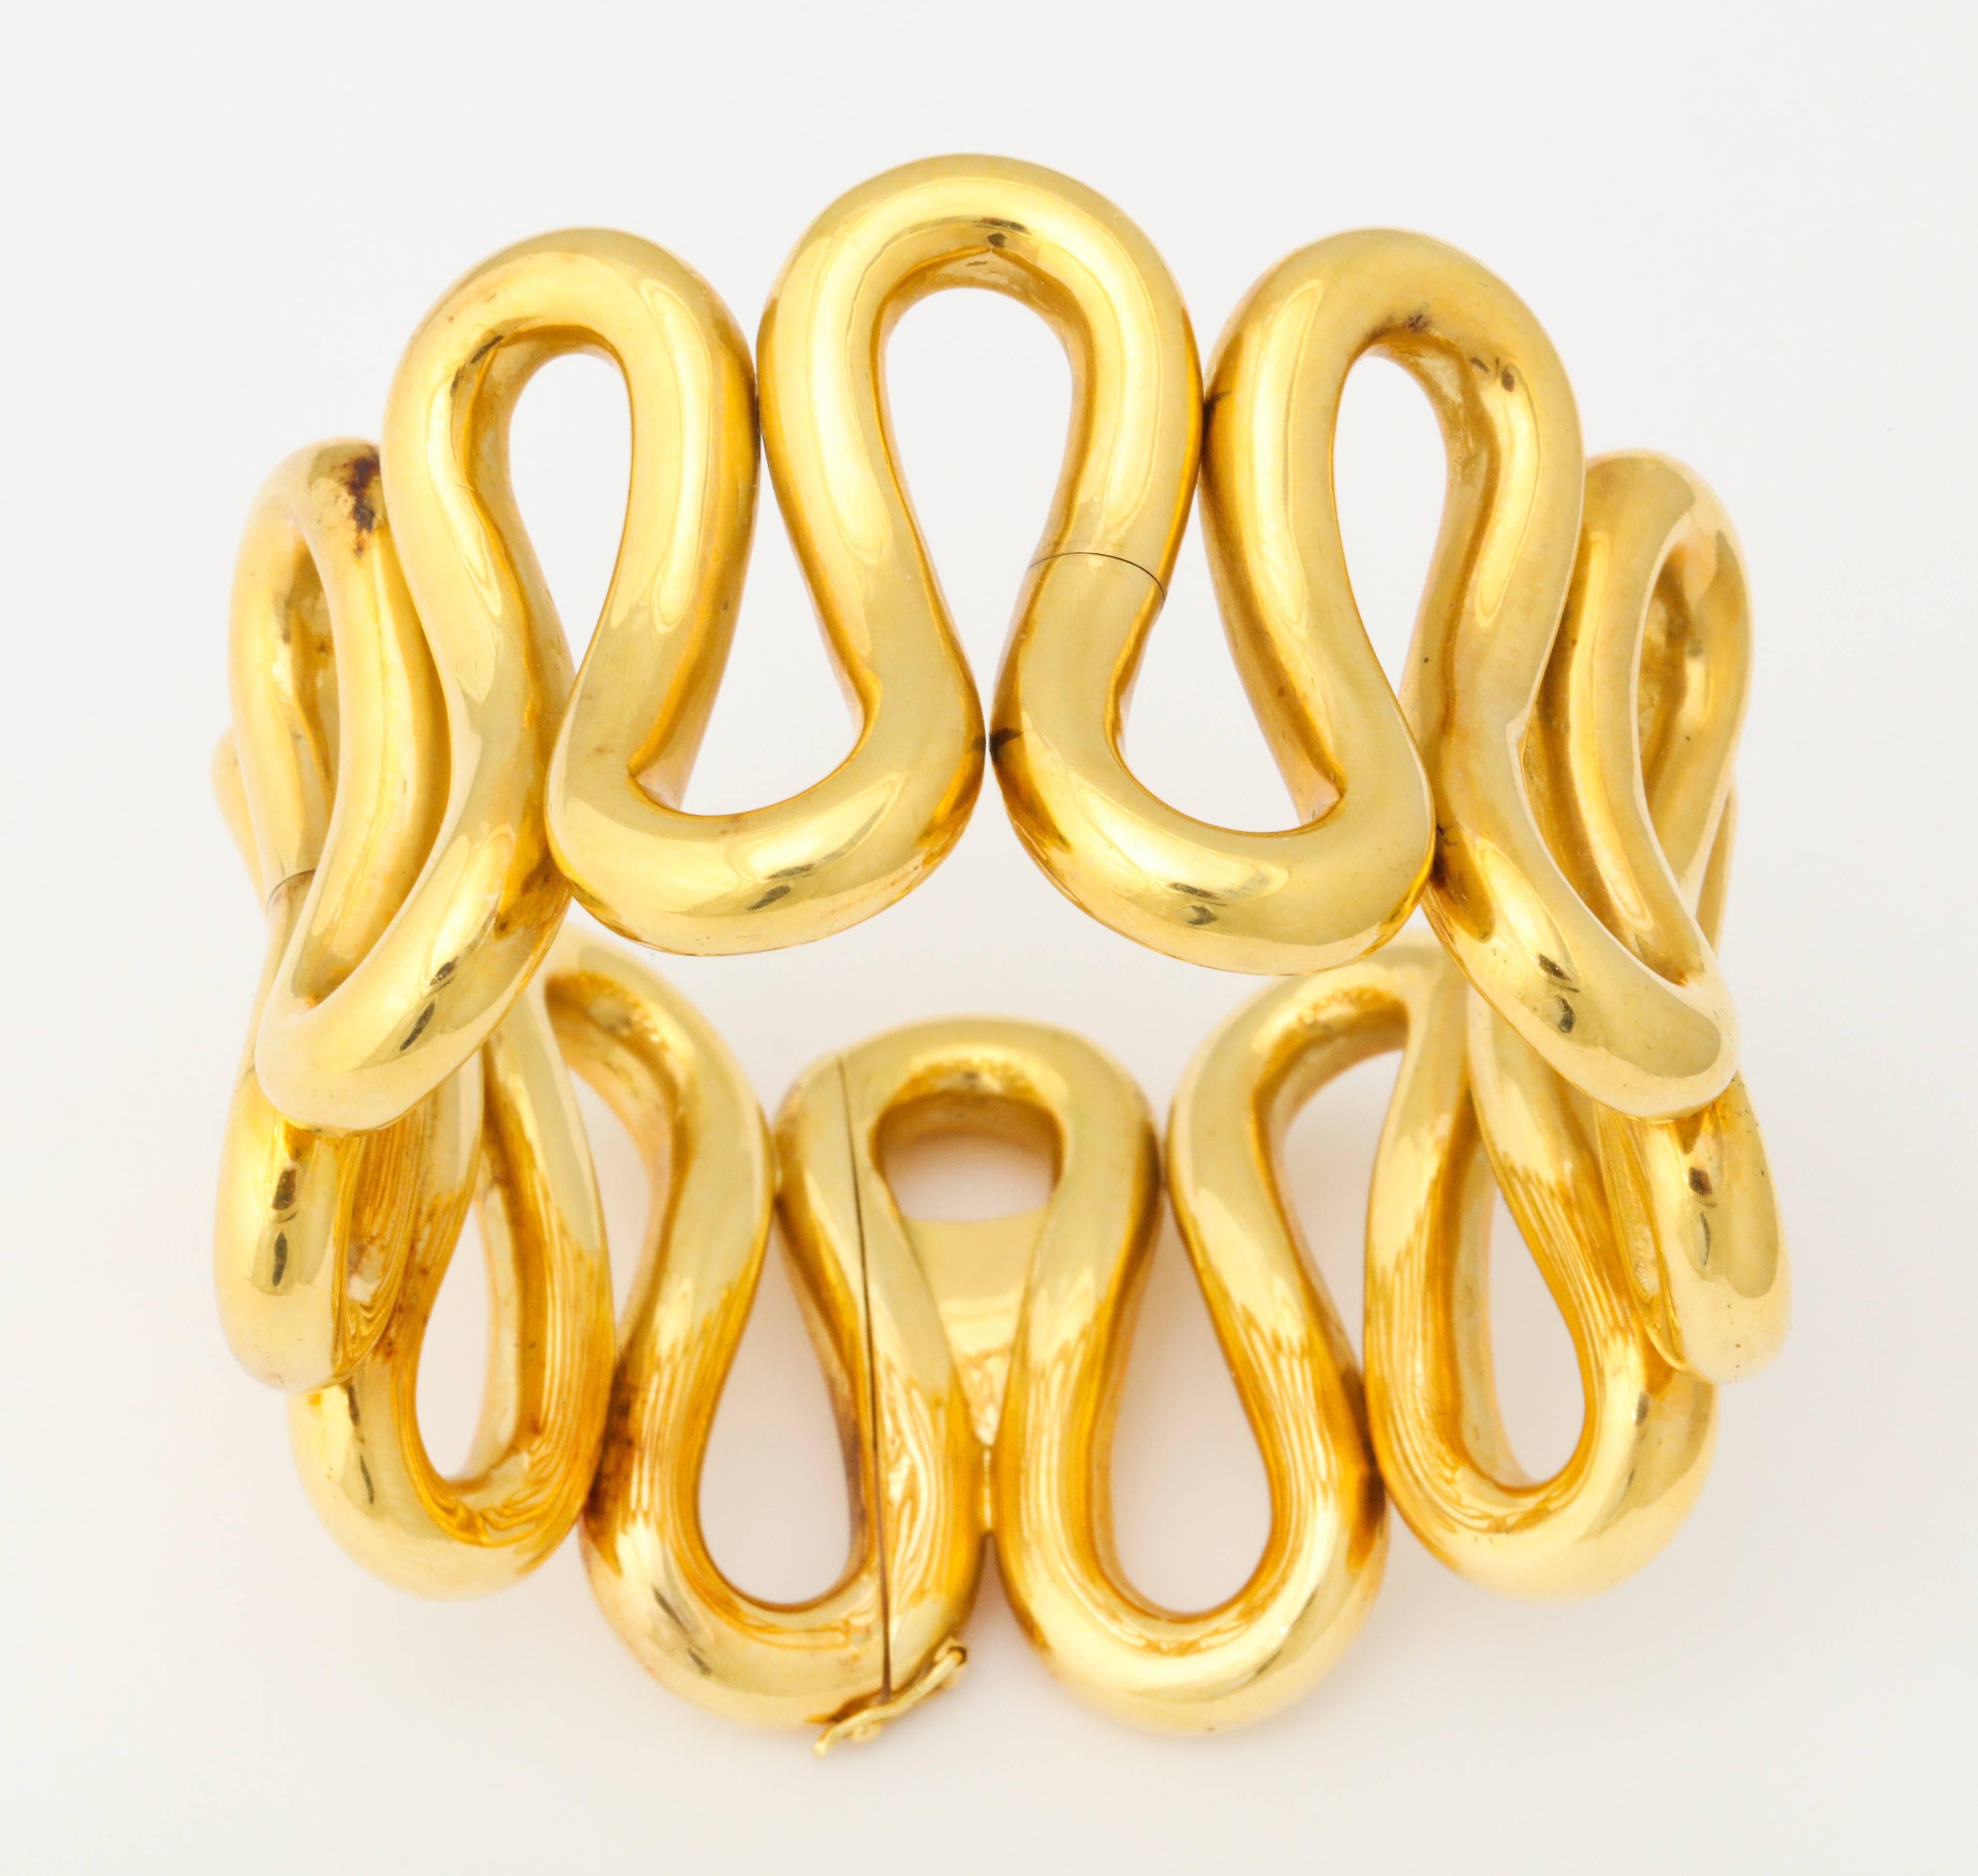 A bold and chic 18kt yellow gold wave design bracelet, as only the Italians know how to do it.  The overall width is 1 1/2 inches and the bracelet will comfortably fit a wrist size of up to 7 inches.  Weighing in at just over 4oz, you will know that